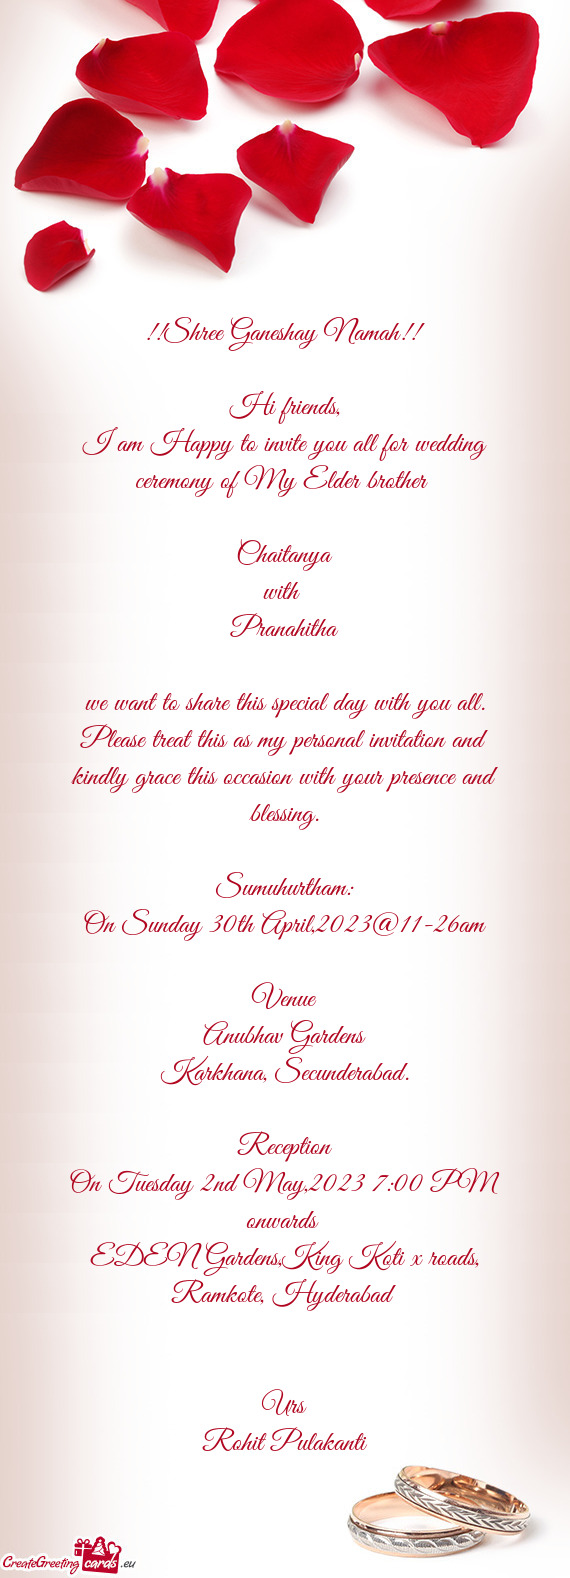 I am Happy to invite you all for wedding ceremony of My Elder brother